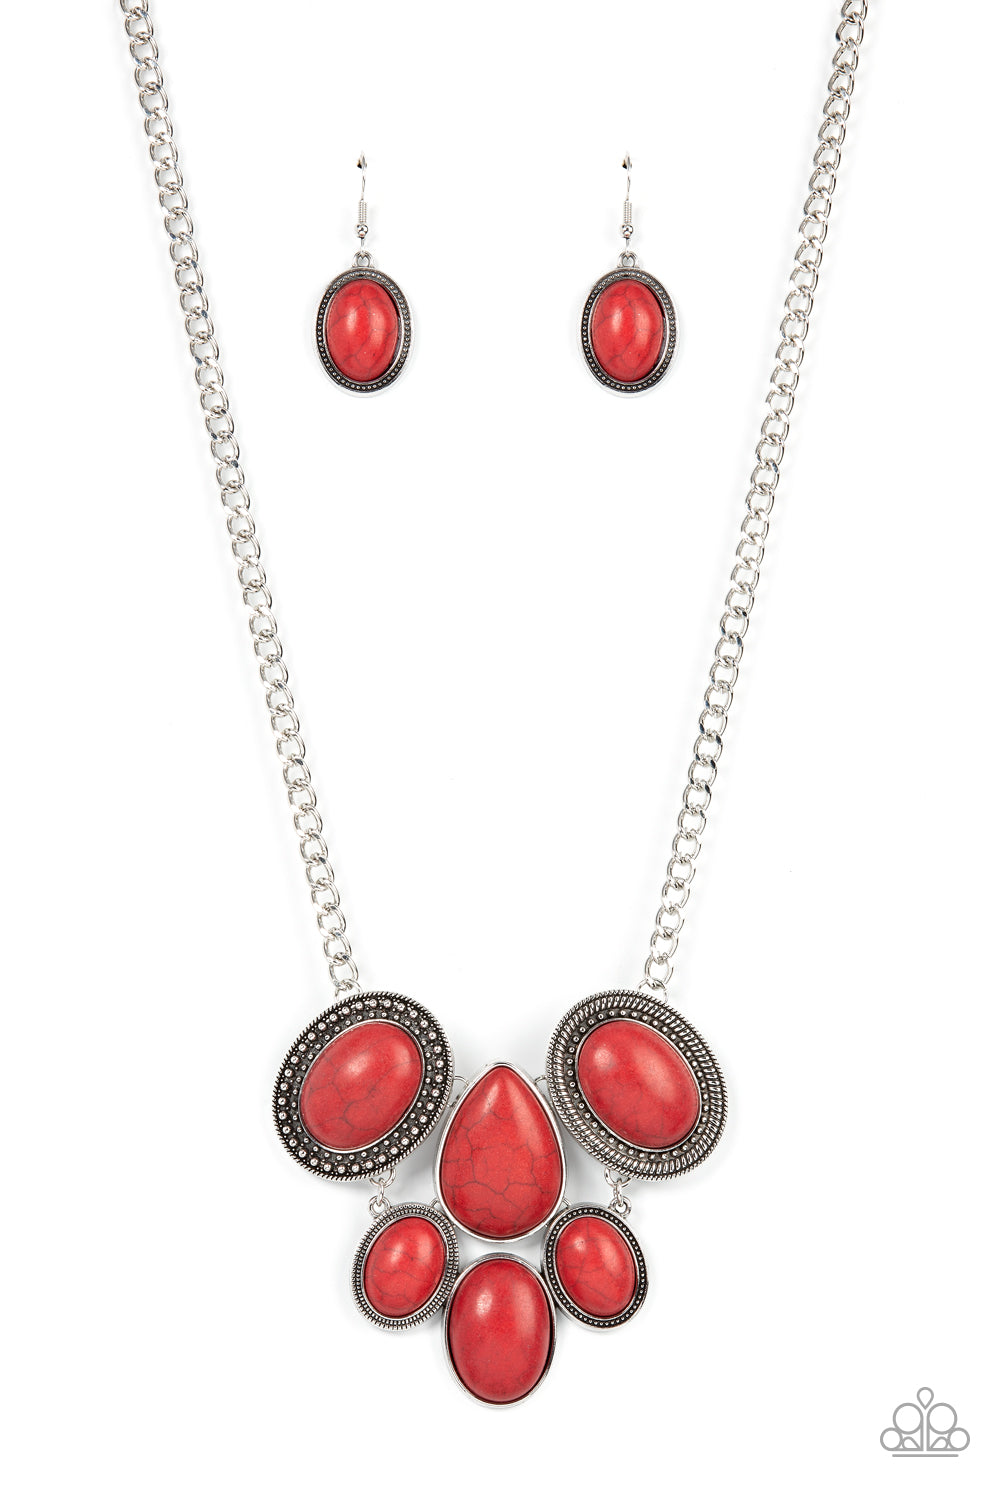 All-Natural Nostalgia - Red Necklace-Paparazzi